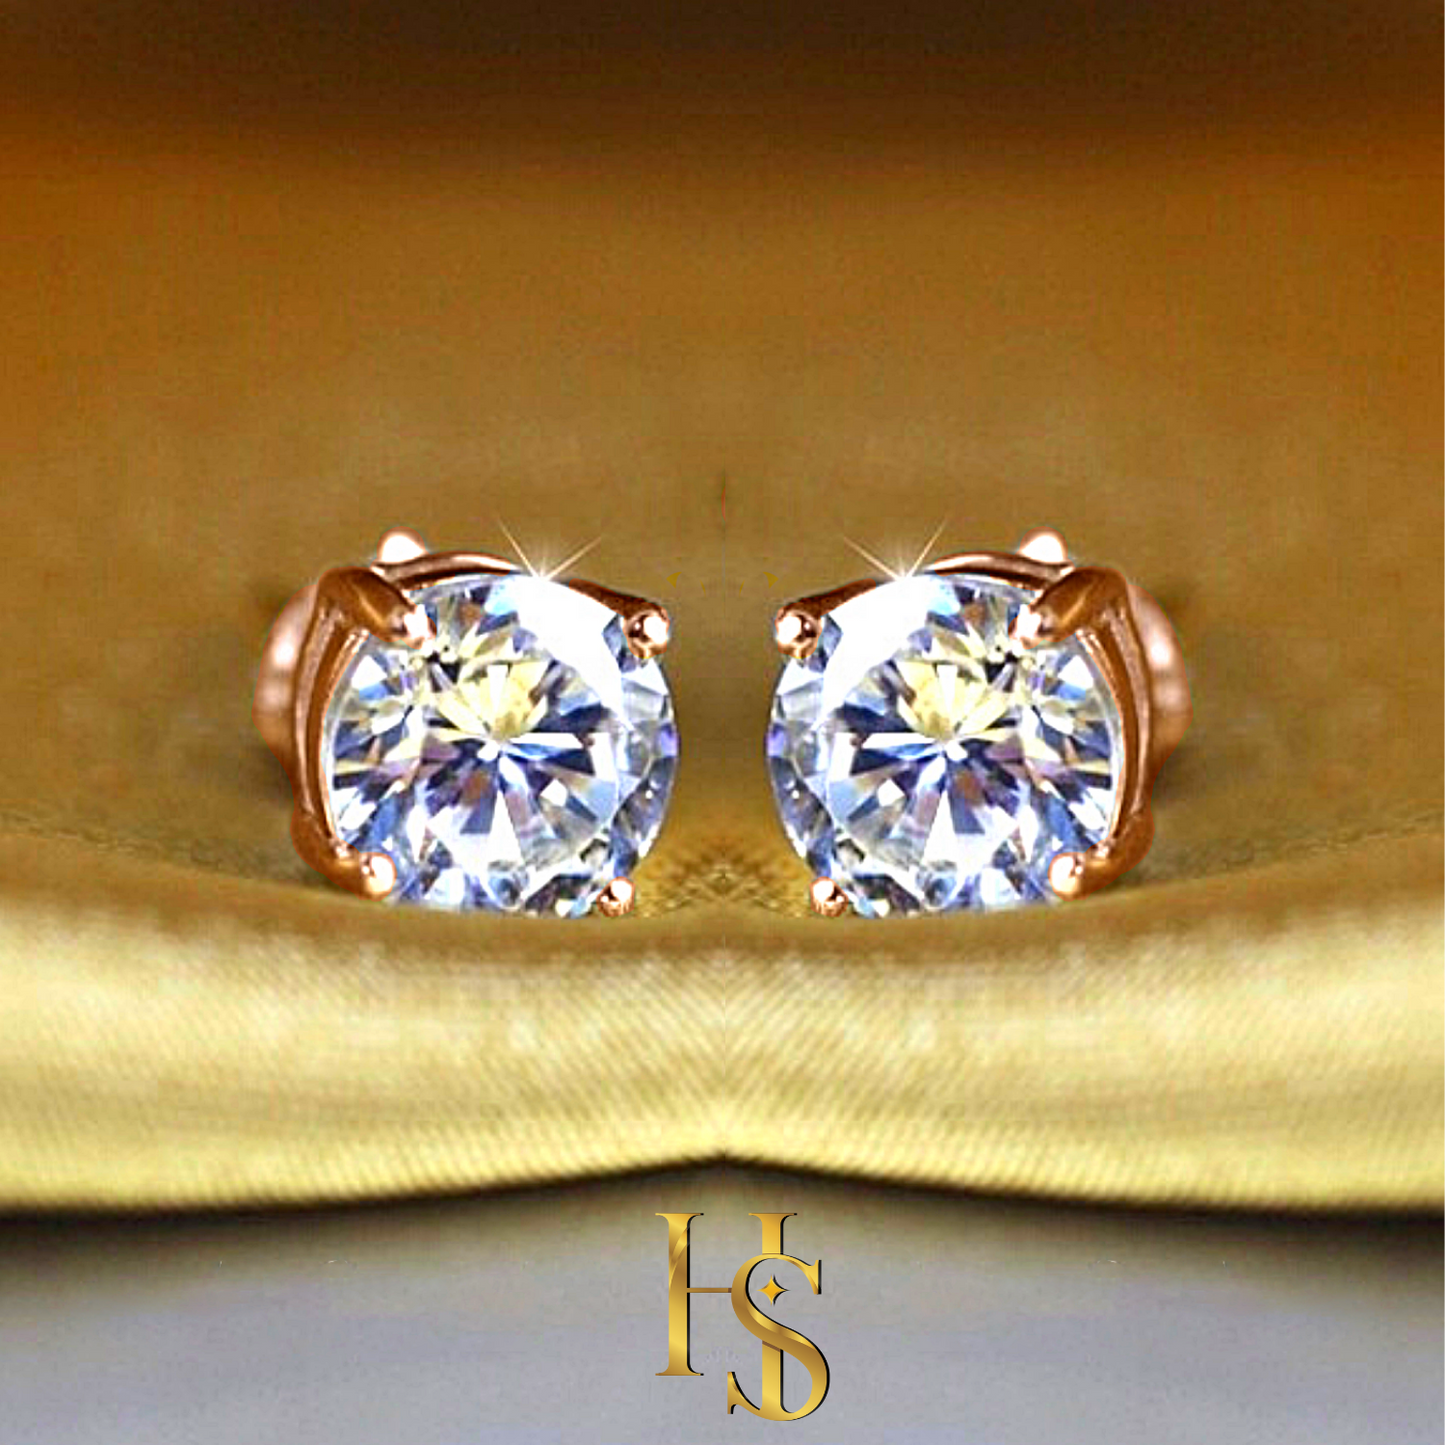 Solitaire Earrings embellished with Swarovski Zirconia - 92.5 Silver in 18K Rose Gold Finish